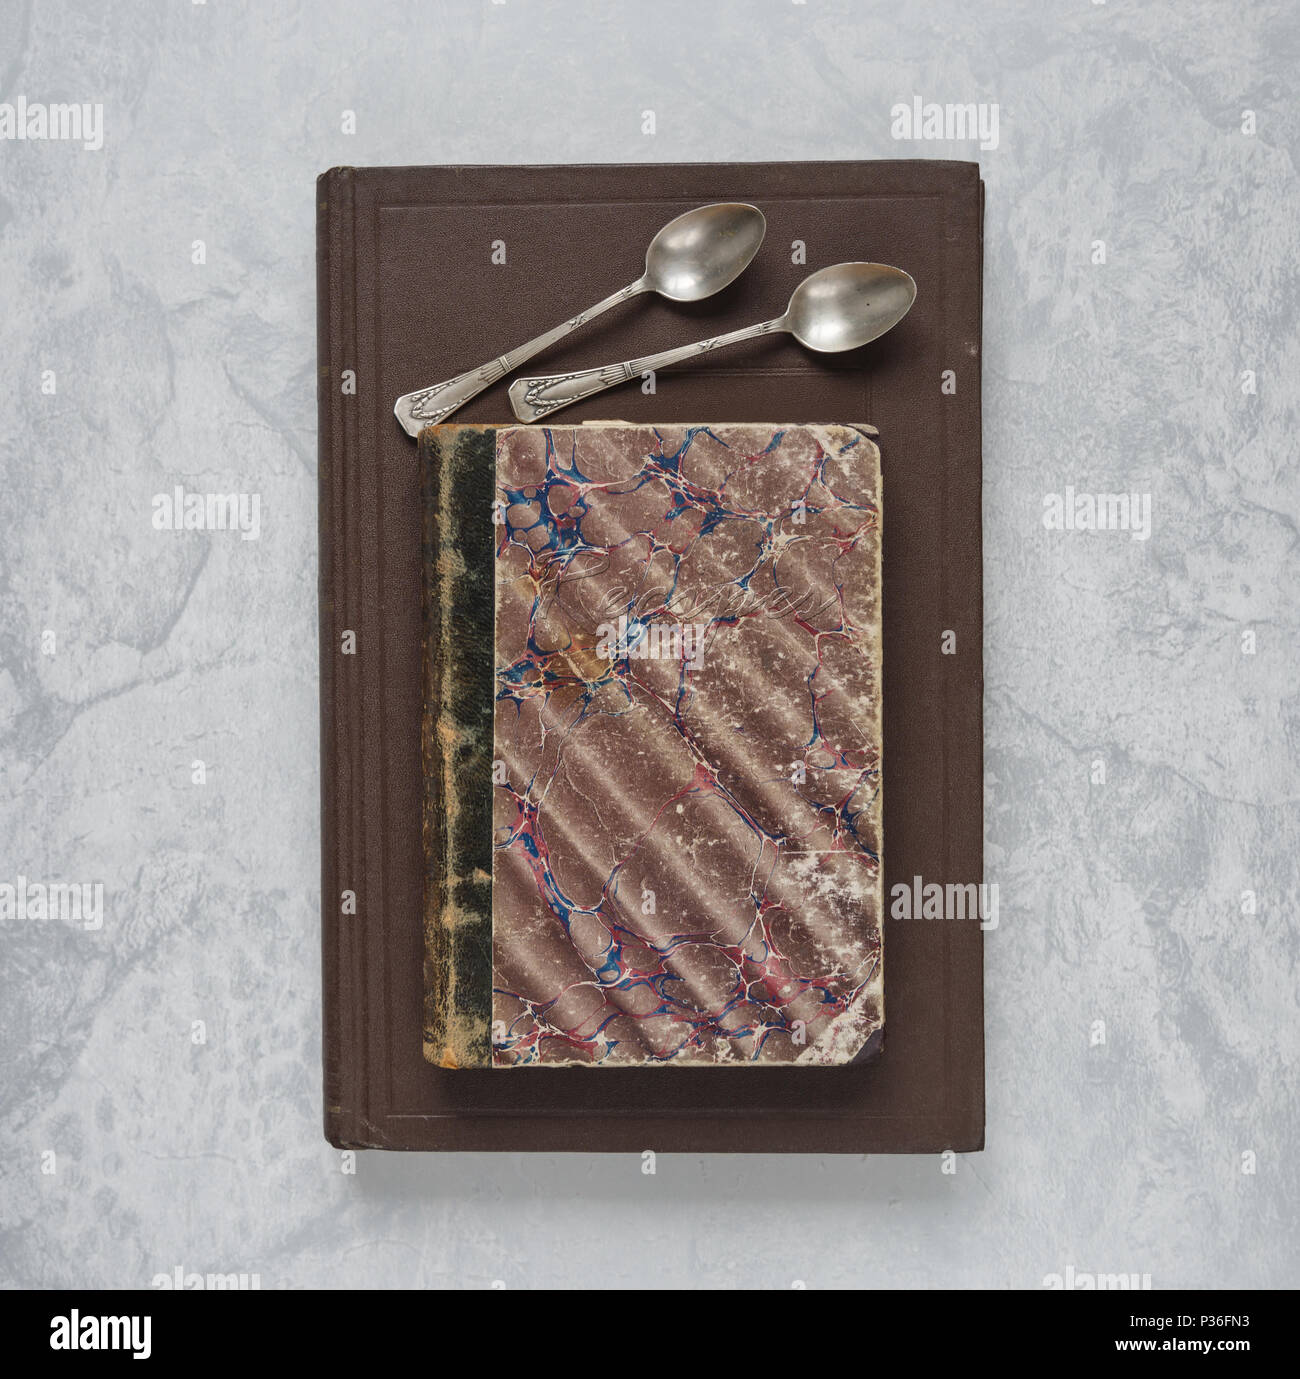 Two teaspoons lying on an old recipes books on a marble background Stock Photo